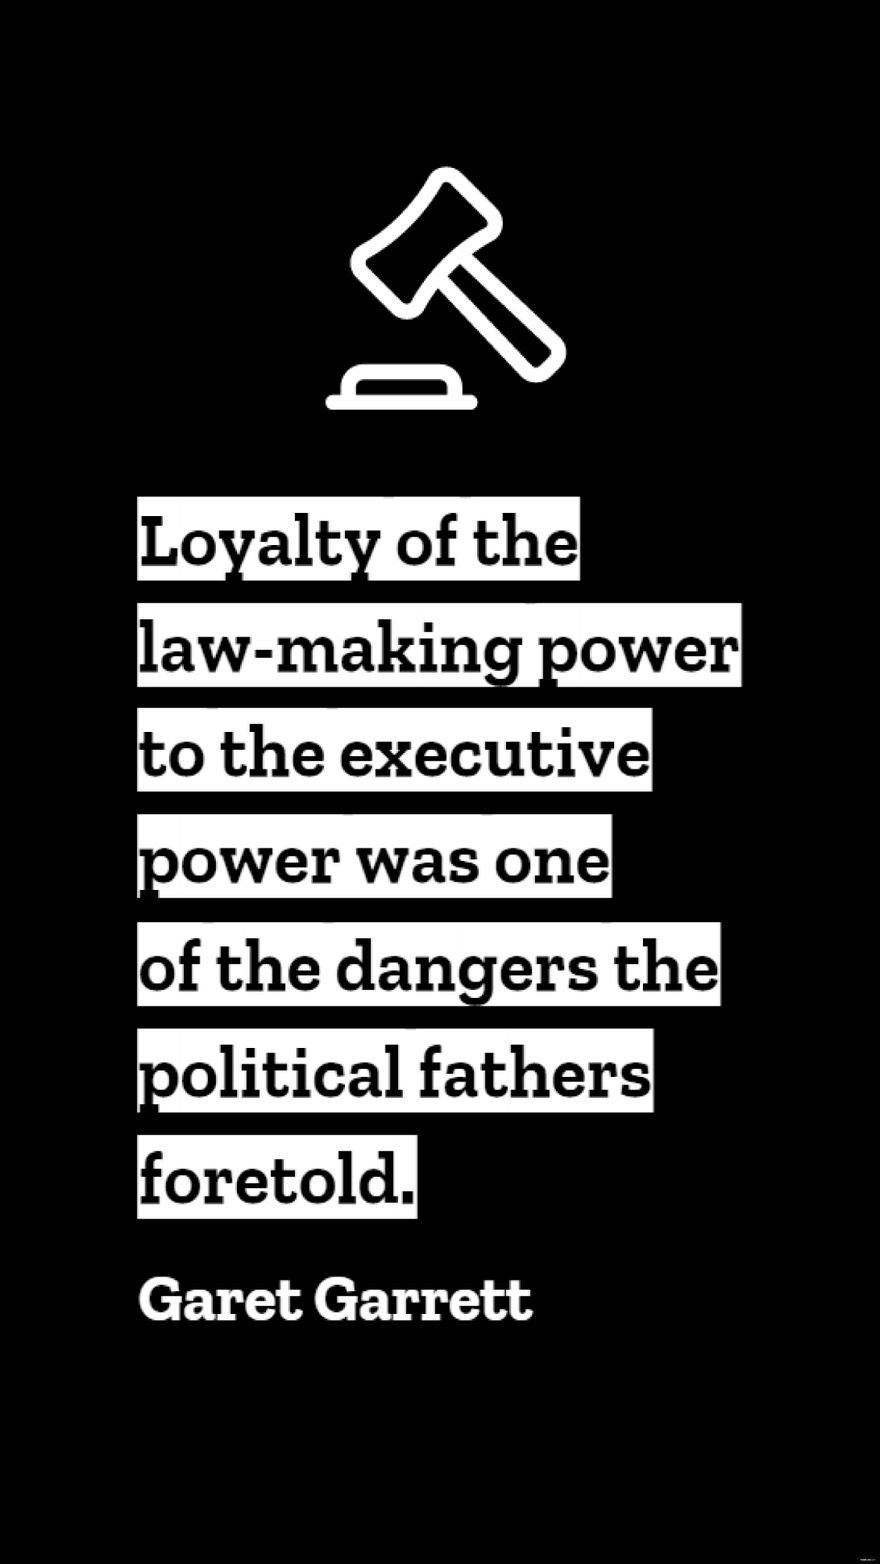 Free Garet Garrett - Loyalty of the law-making power to the executive power was one of the dangers the political fathers foretold. in JPG